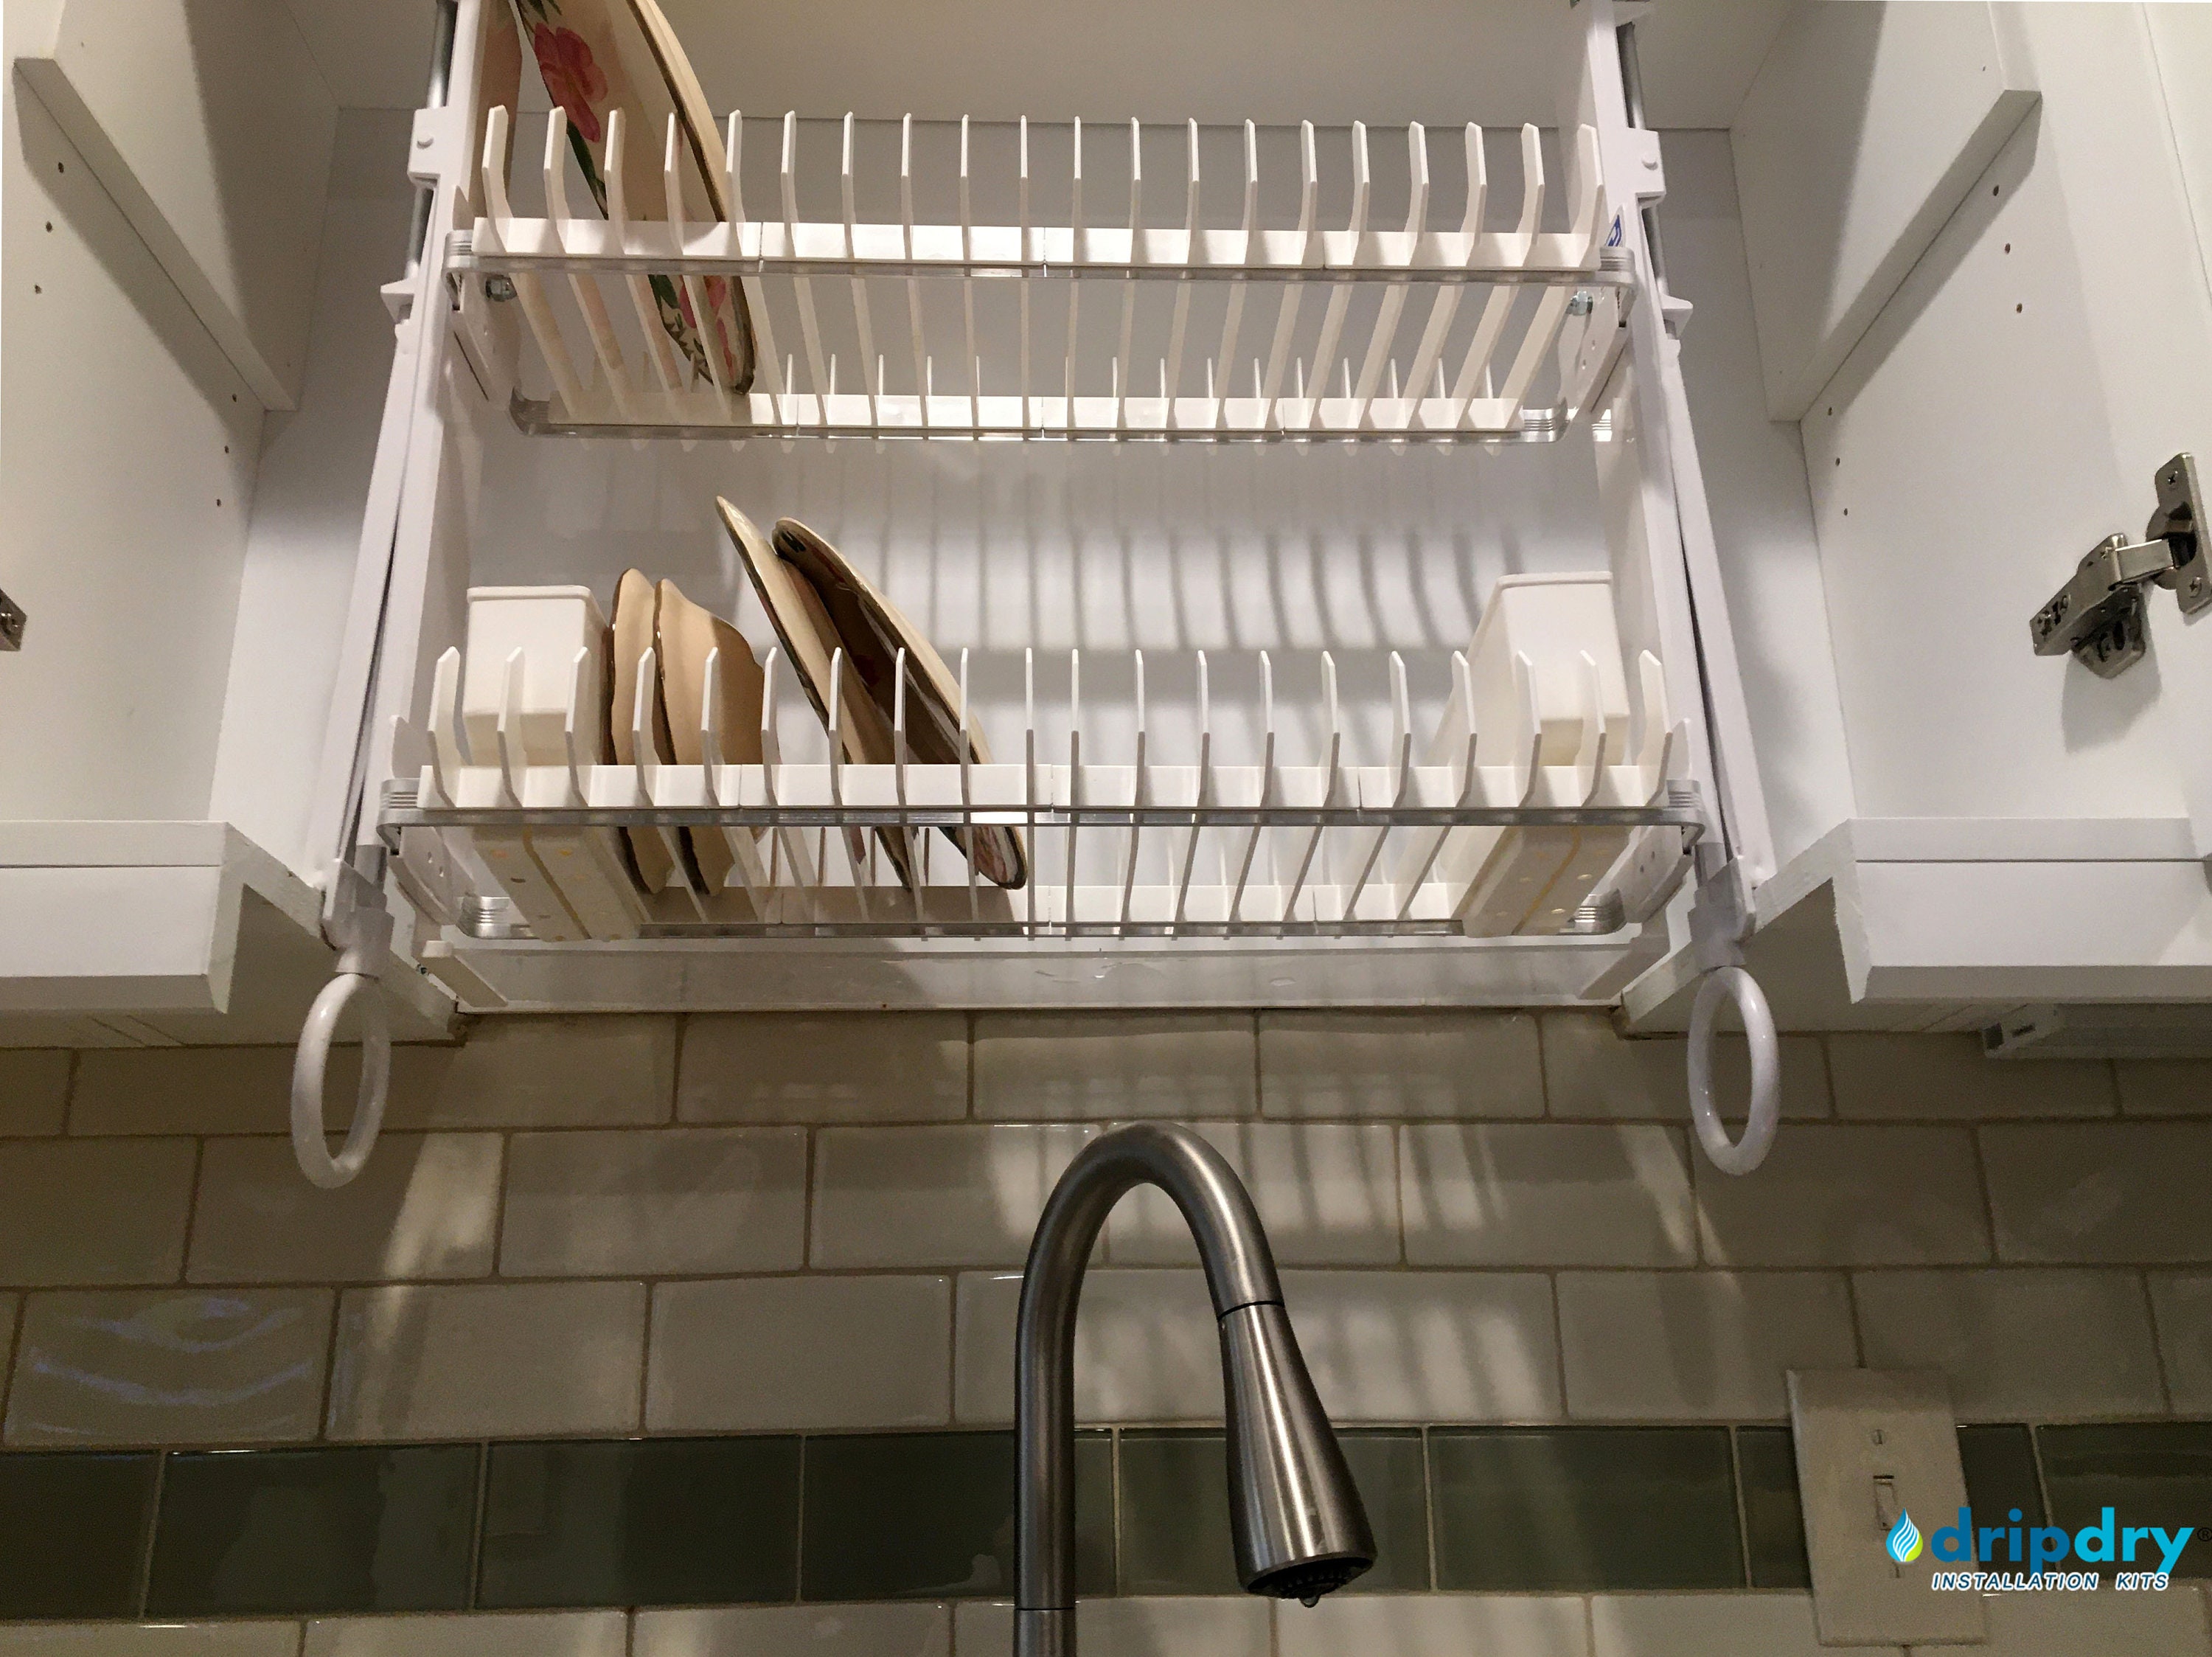 Custom, in-cabinet dish drying rack. Water drips directly into the sink. -  Transitional - Kitchen - Seattle - by Genay Bell Interior Design